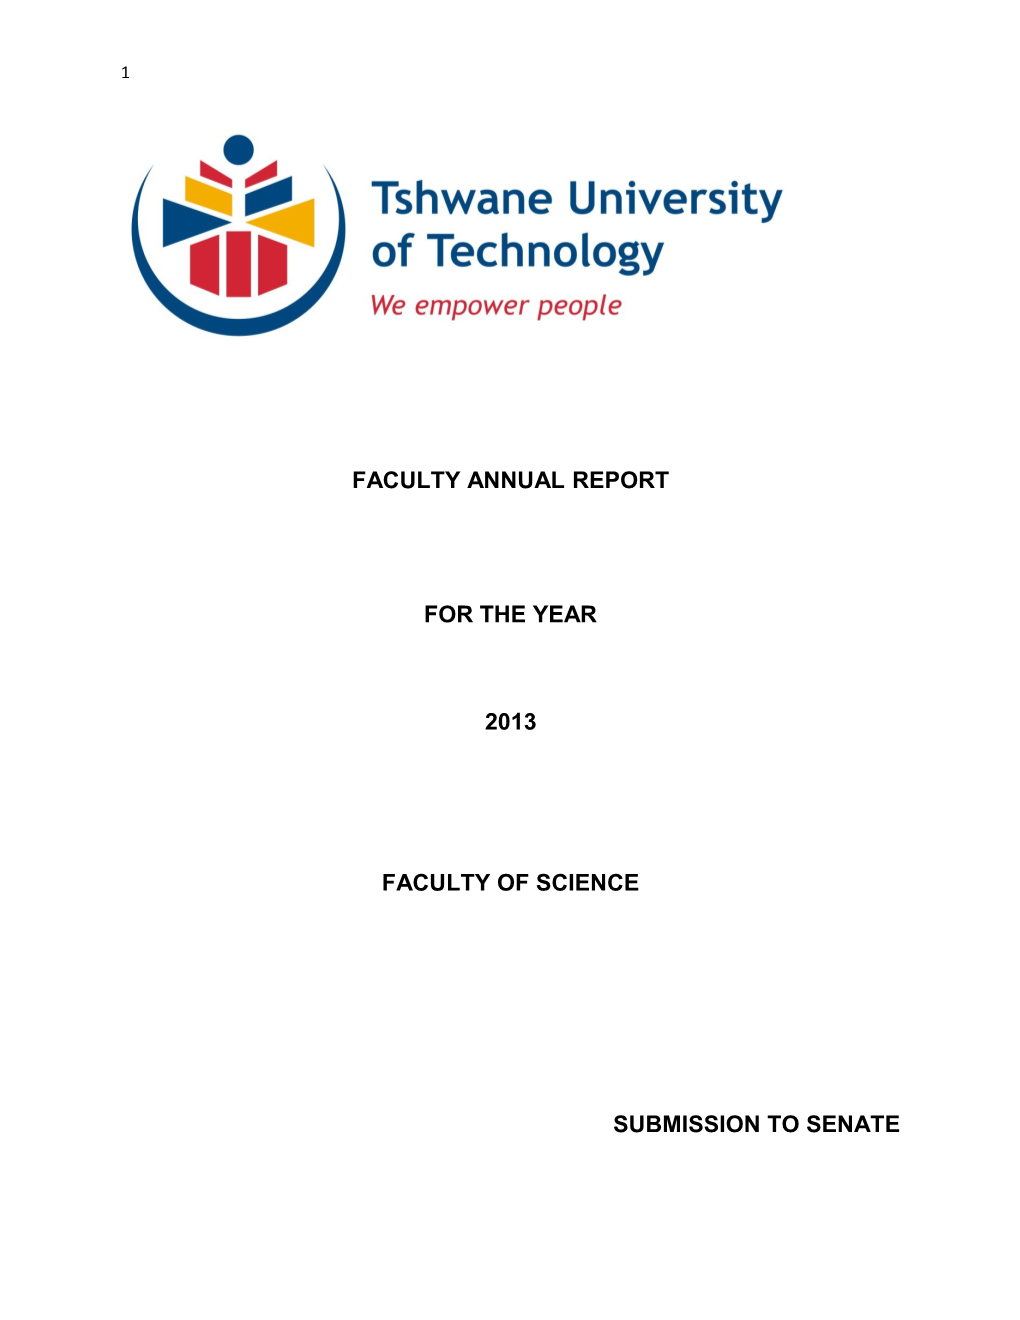 Faculty Annual Report